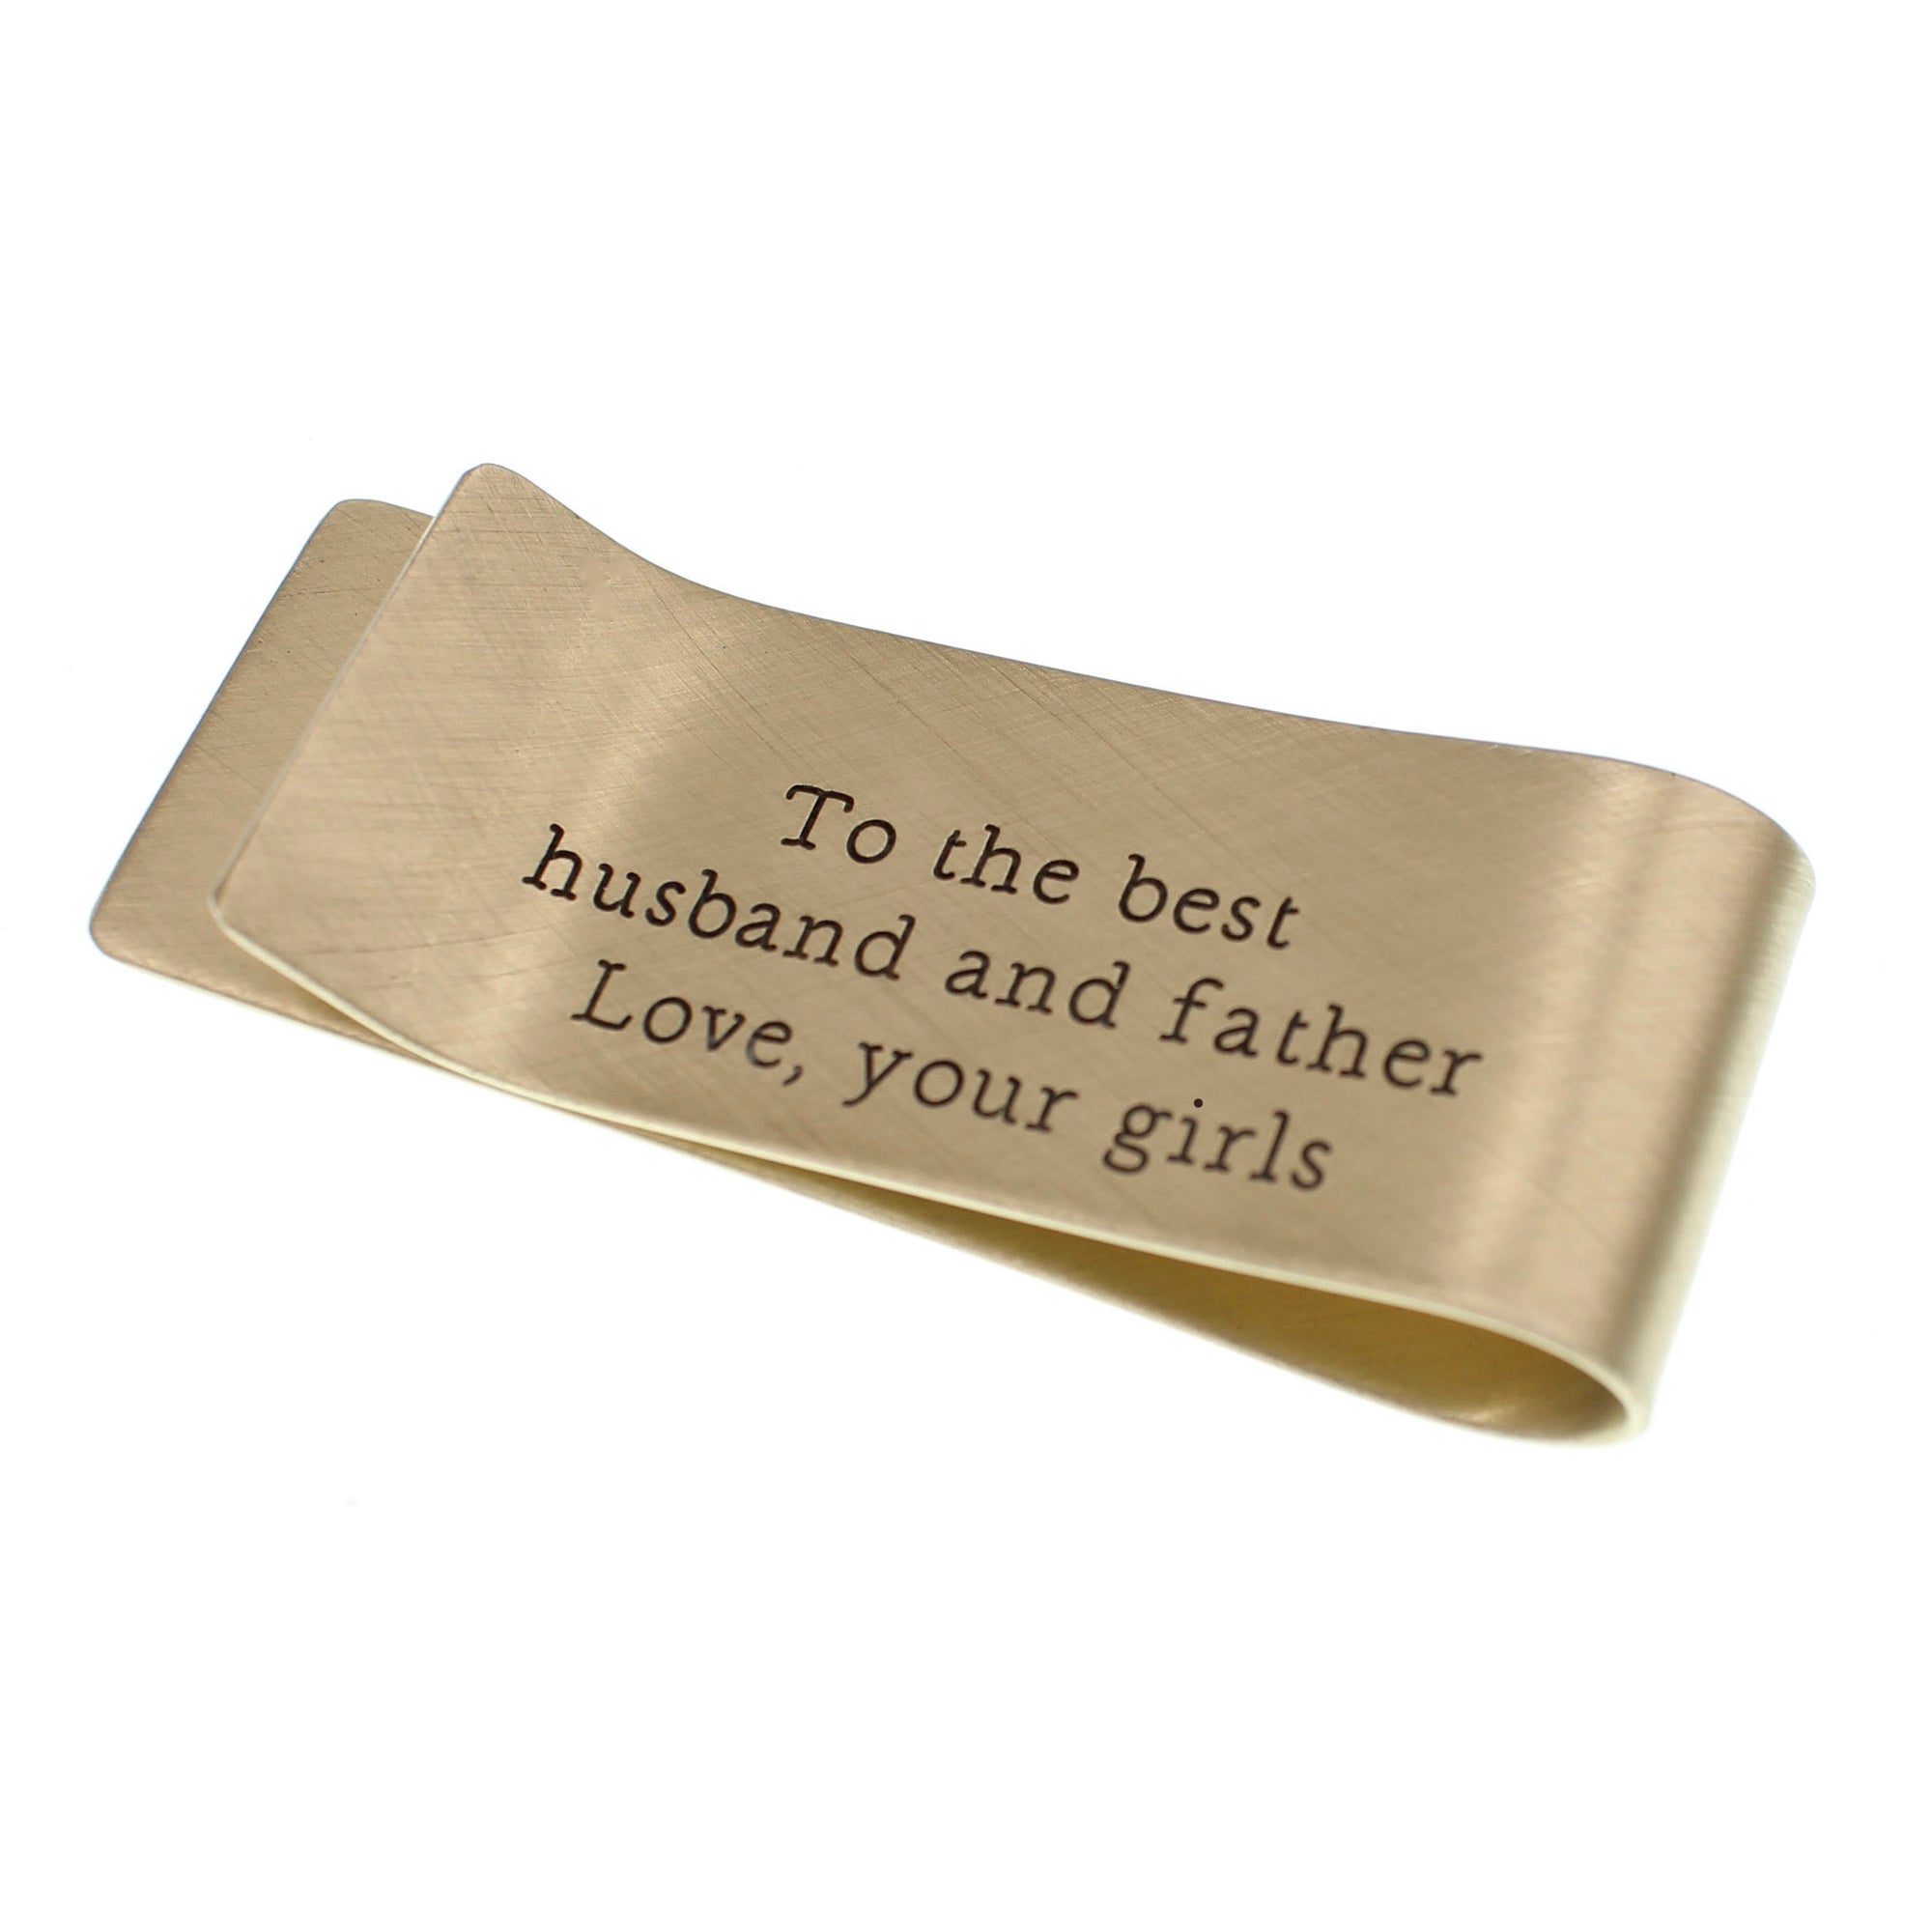 Papa Bear Custom Brass Money Clip Wallet - Engraved with Message from Kids - Bear Claw Gift for Dad - Love It Personalized